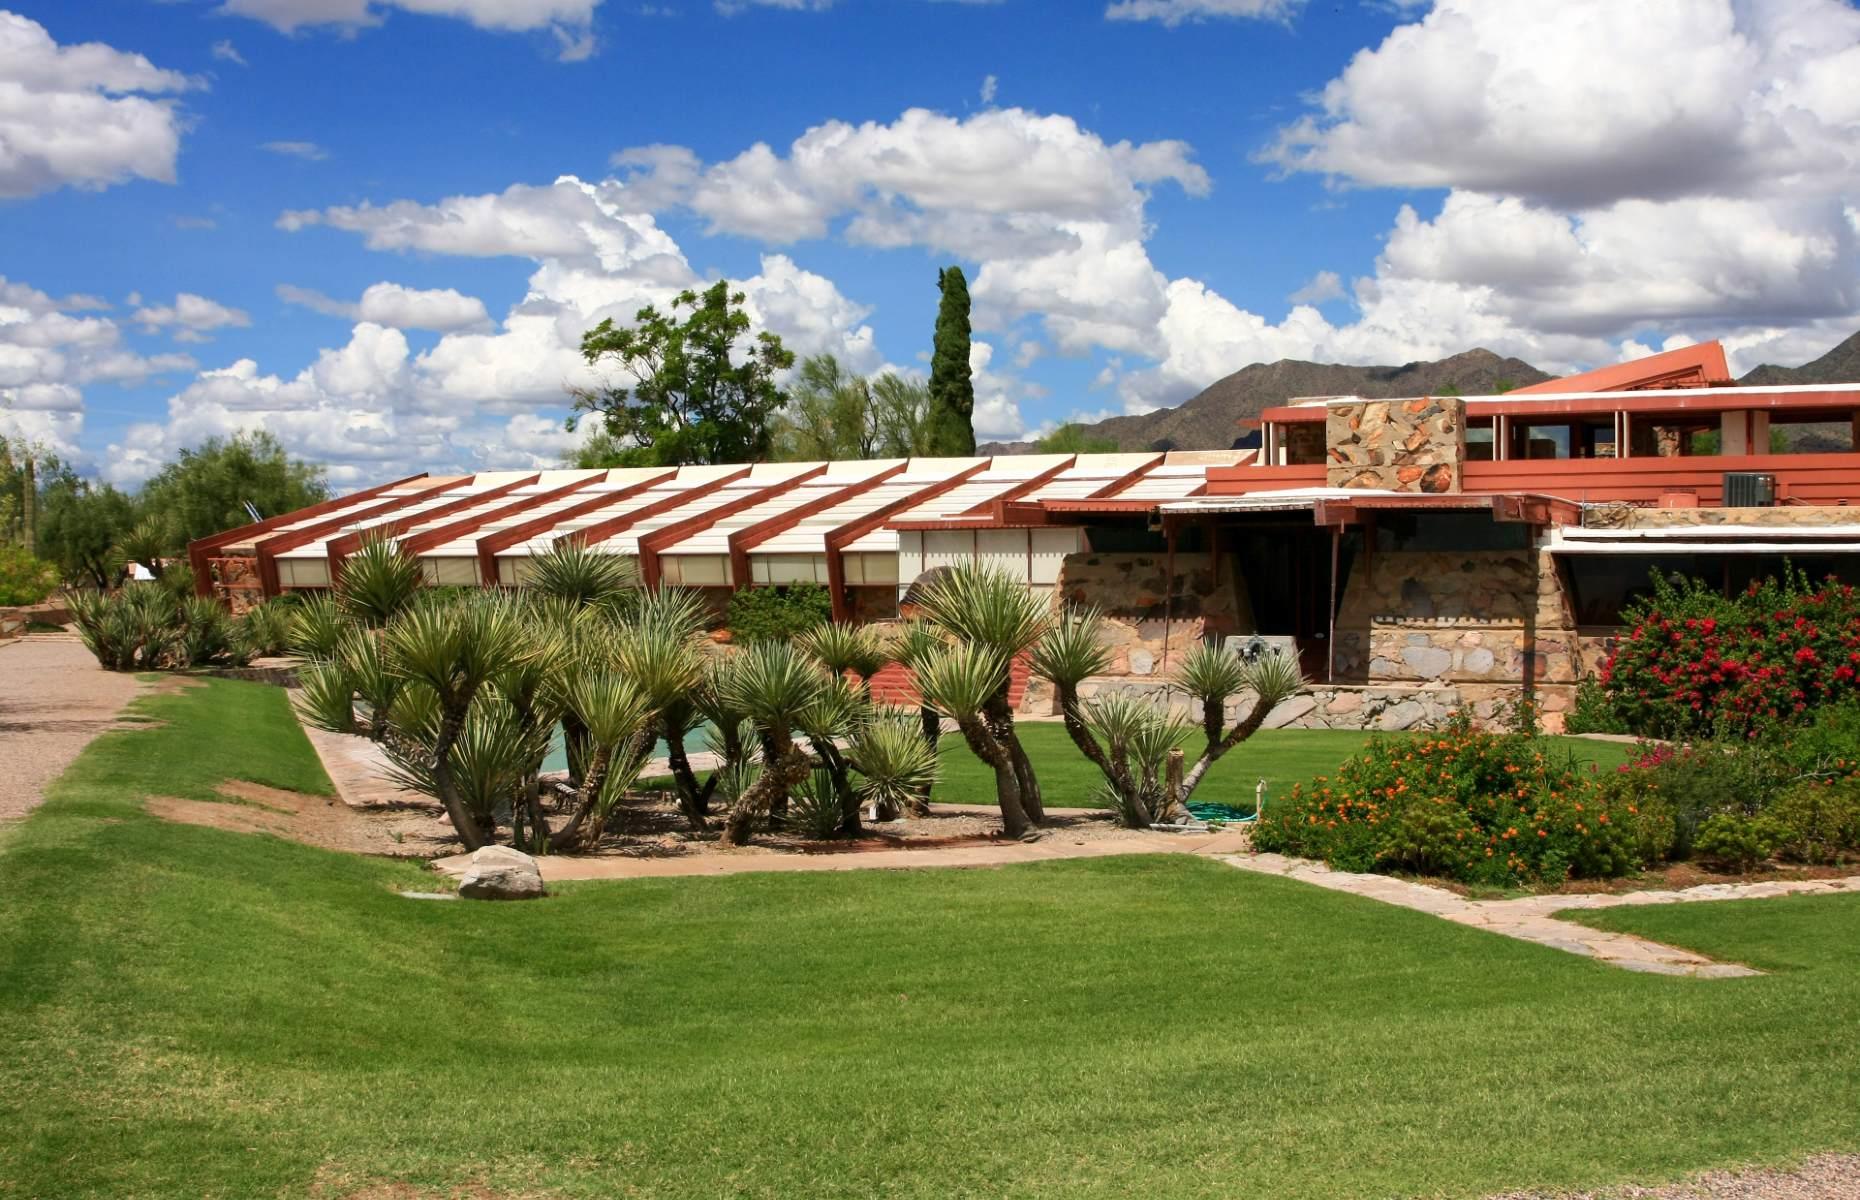 <p>Influential American architect Frank Lloyd Wright was the brains behind this striking building, located at the foot of the McDowell Mountains near Scottsdale. After buying a plot of land, Wright began work on <a href="https://franklloydwright.org/taliesin-west/">Taliesin West</a> in 1937, wishing to create a winter retreat for himself and his students. He wanted the structure to reflect its surroundings, so he gave it canvas rooftops to ensure it got optimum sunlight, surrounded it with local rocks and sand, and used redwood beams to echo the desert’s color palette. Today, visitors can take guided or self-guided tours around the building to learn about Wright’s life and legacy.</p>